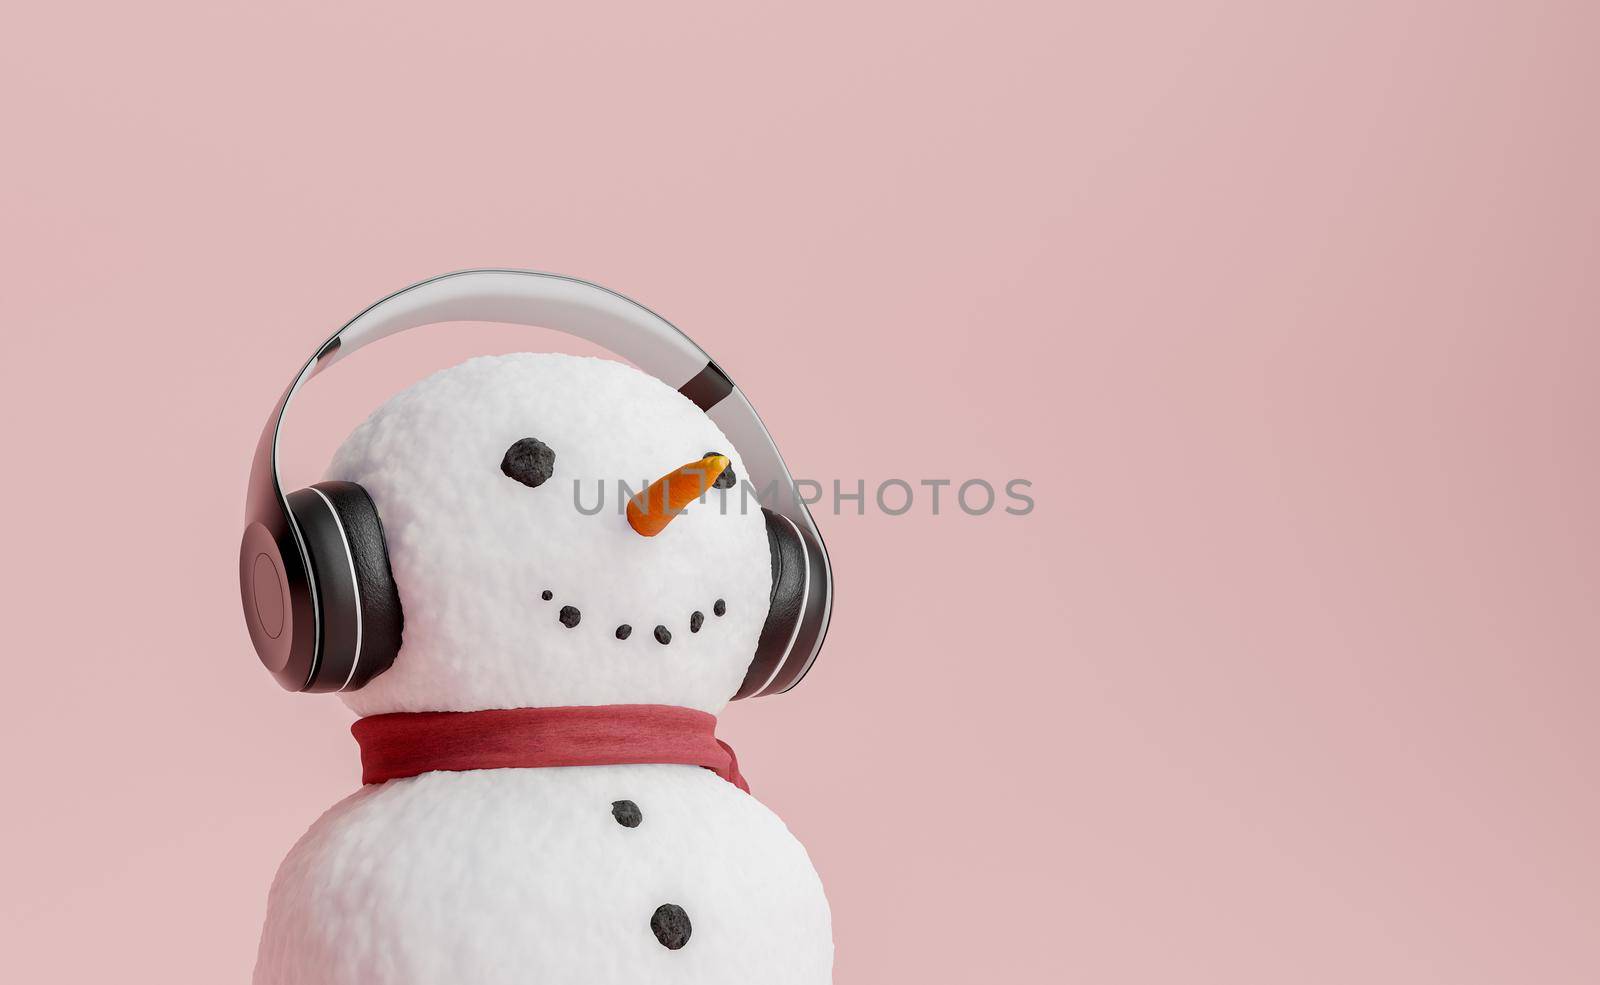 snowman with headphones listening to music by asolano